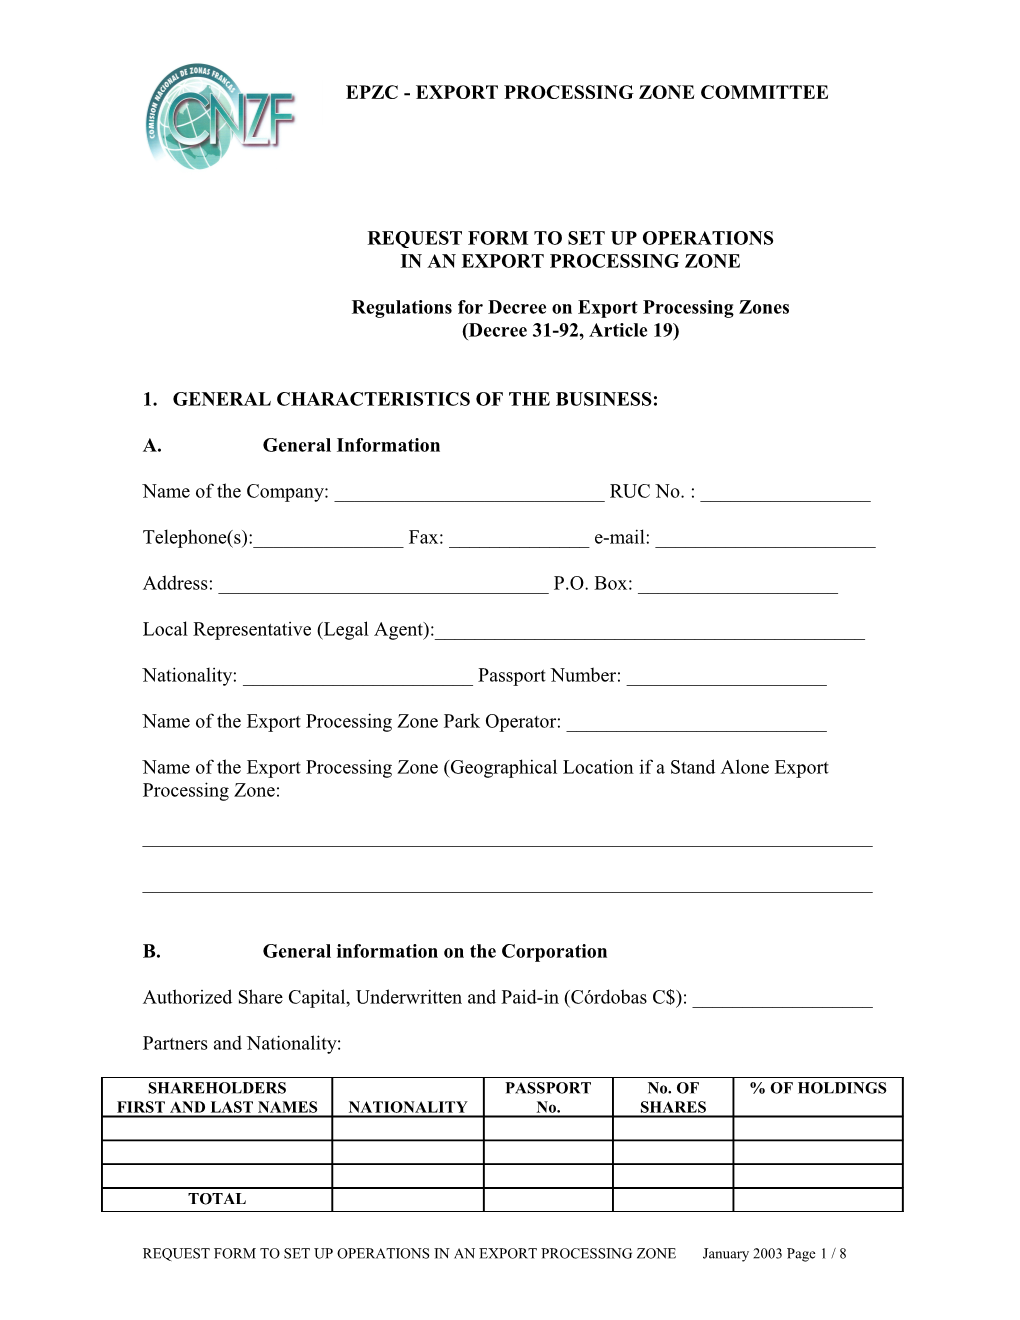 Request Form to Set up Operations